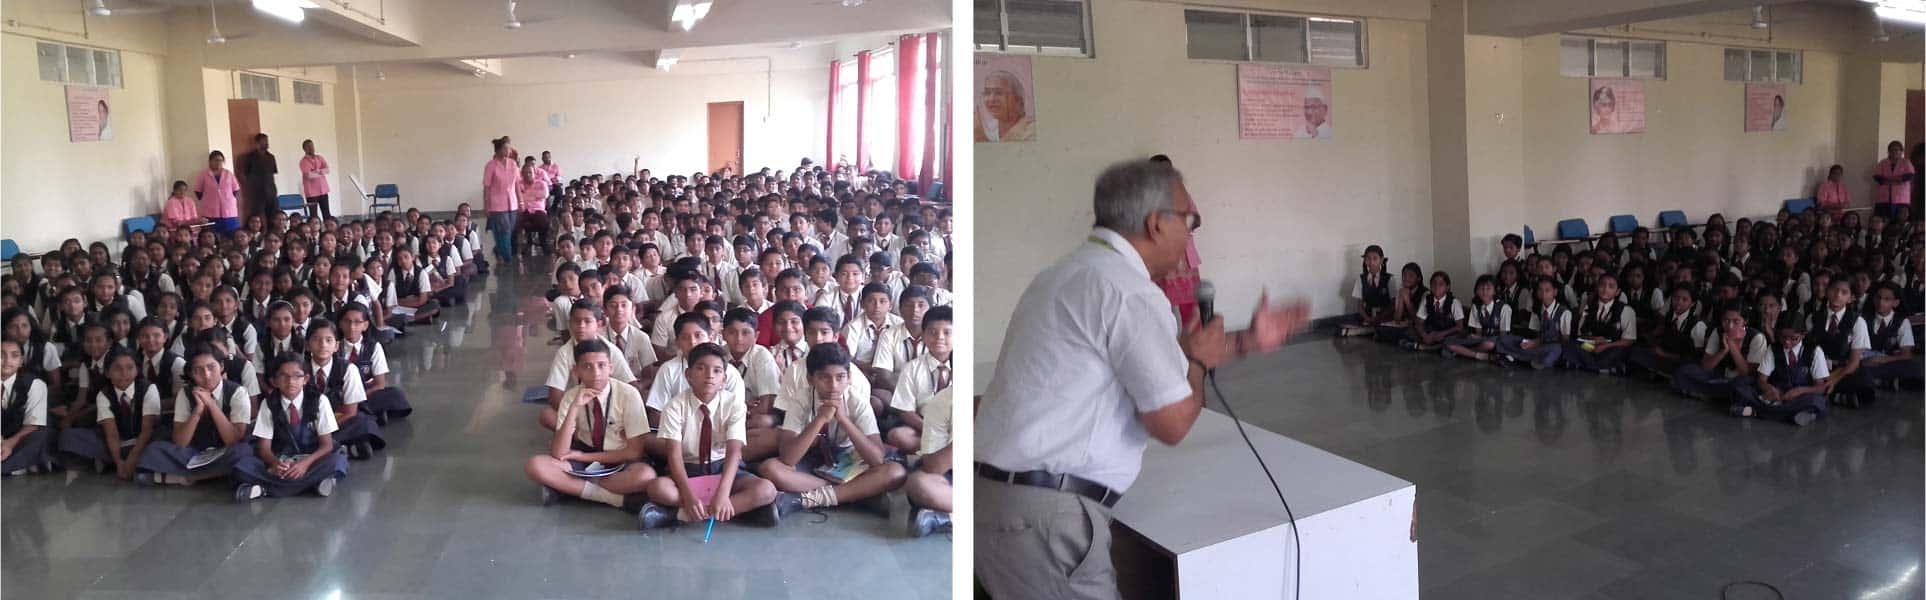 Value education session conducted for school children